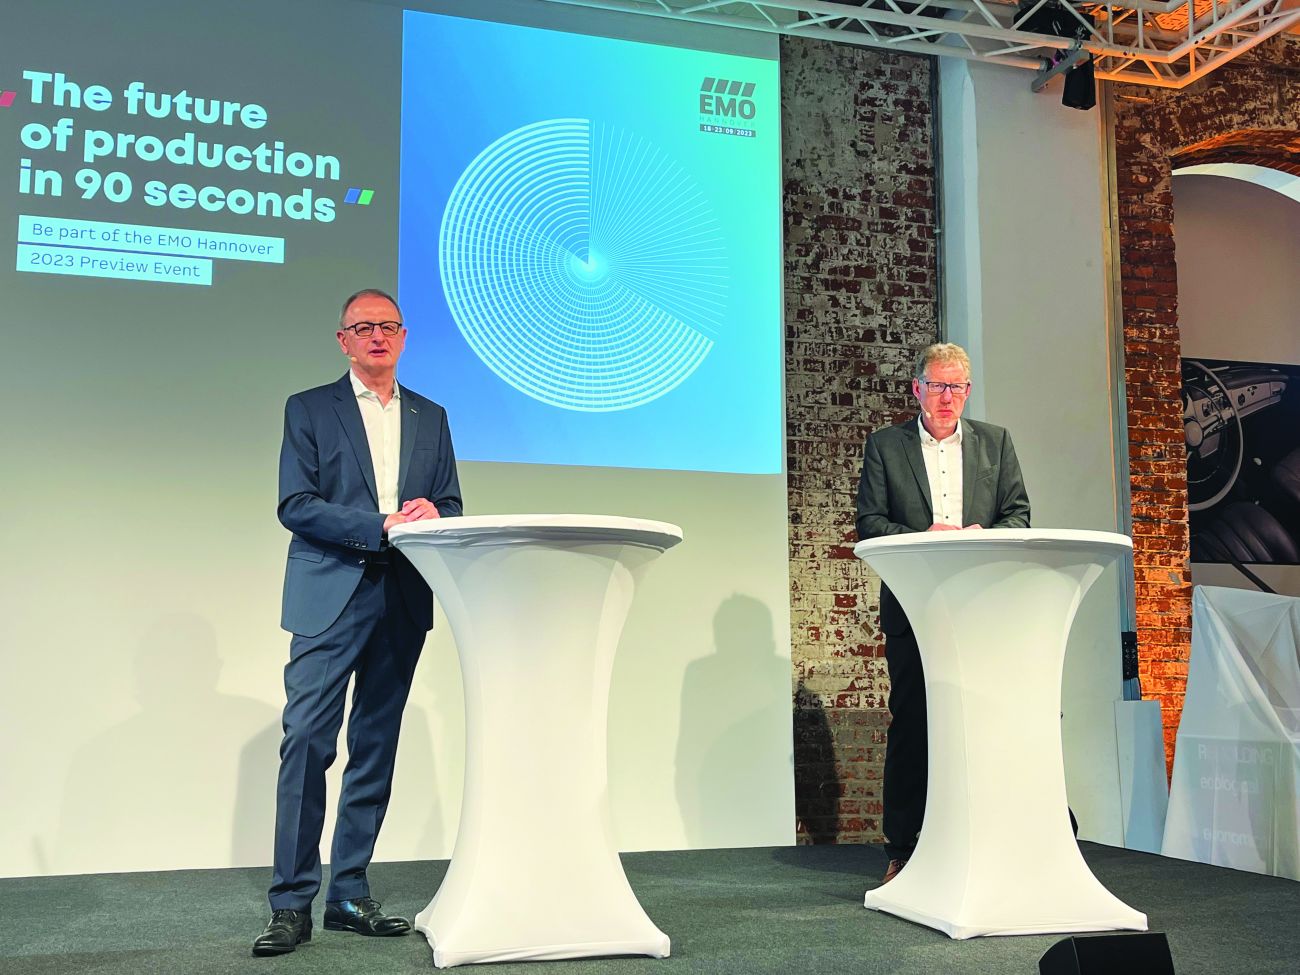 L-R: Dr Wilfried Schäfer, Executive Director, German Machine Tool Builders' Association (VDW), and Dr Markus Heering, Managing Director, German Machine Tool Builders' Association (VDW), addressing the global trade press at EMO Hannover Press Preview